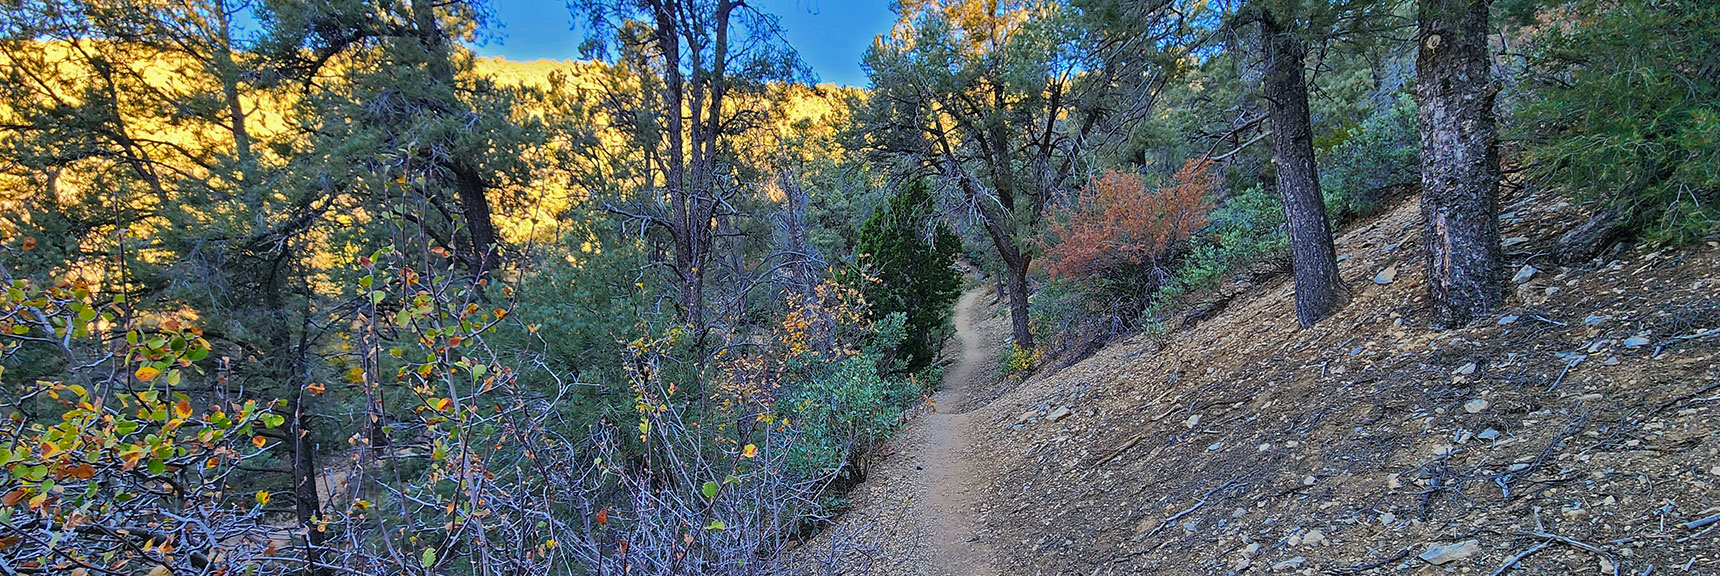 Ascending the First Hill Beyond the Trailhead | Griffith Shadow Loop | Lovell Canyon, Nevada